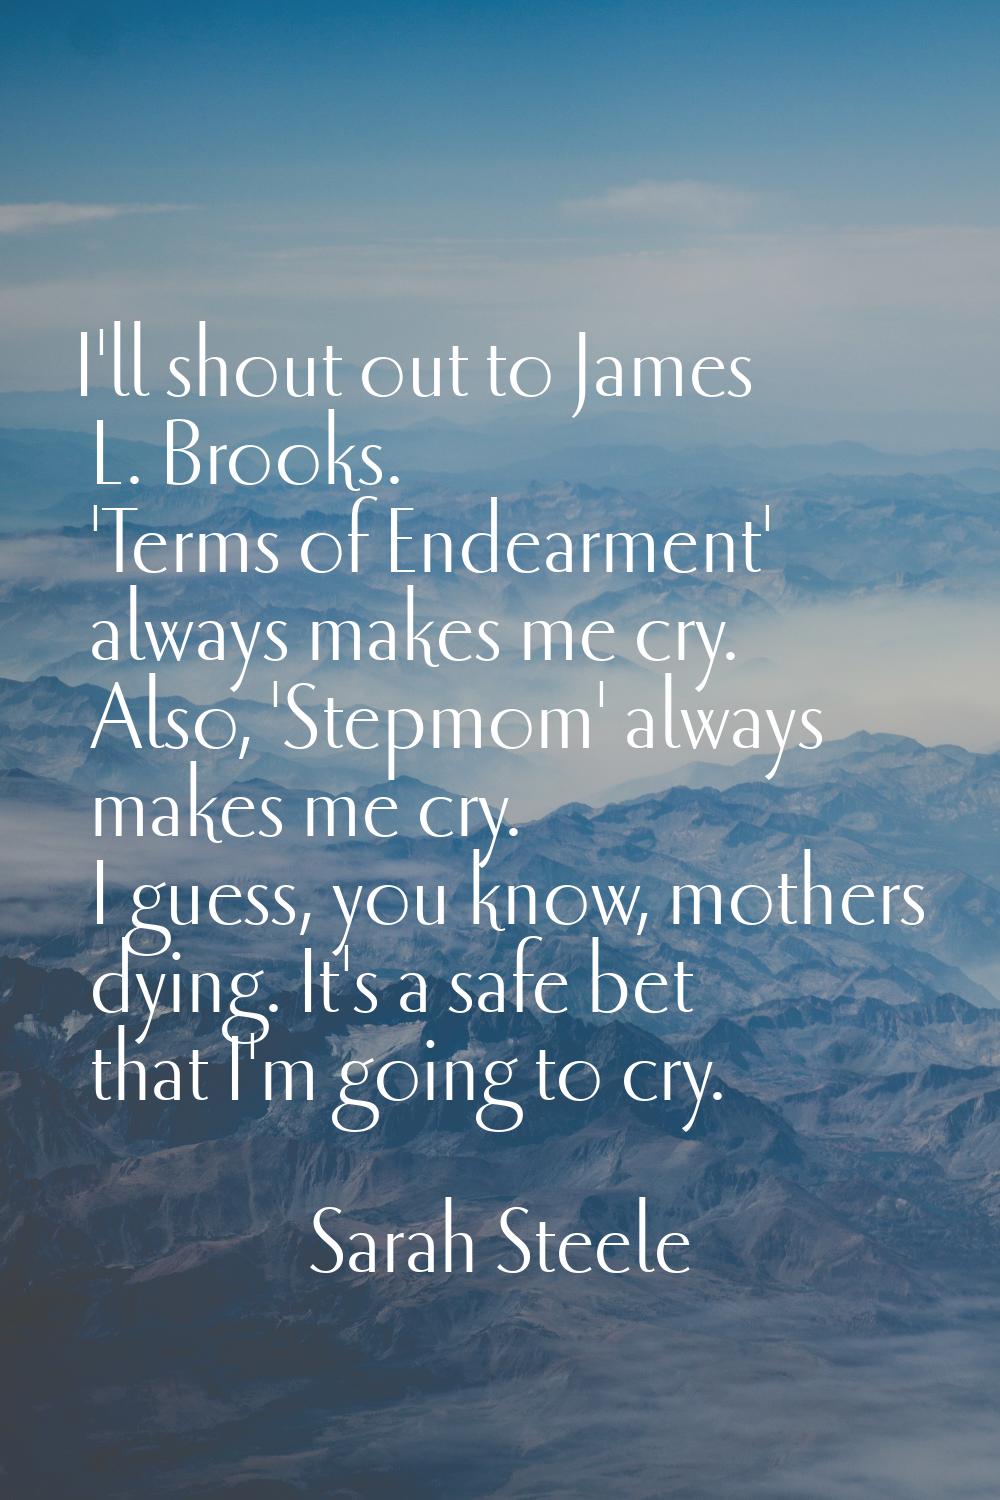 I'll shout out to James L. Brooks. 'Terms of Endearment' always makes me cry. Also, 'Stepmom' alway